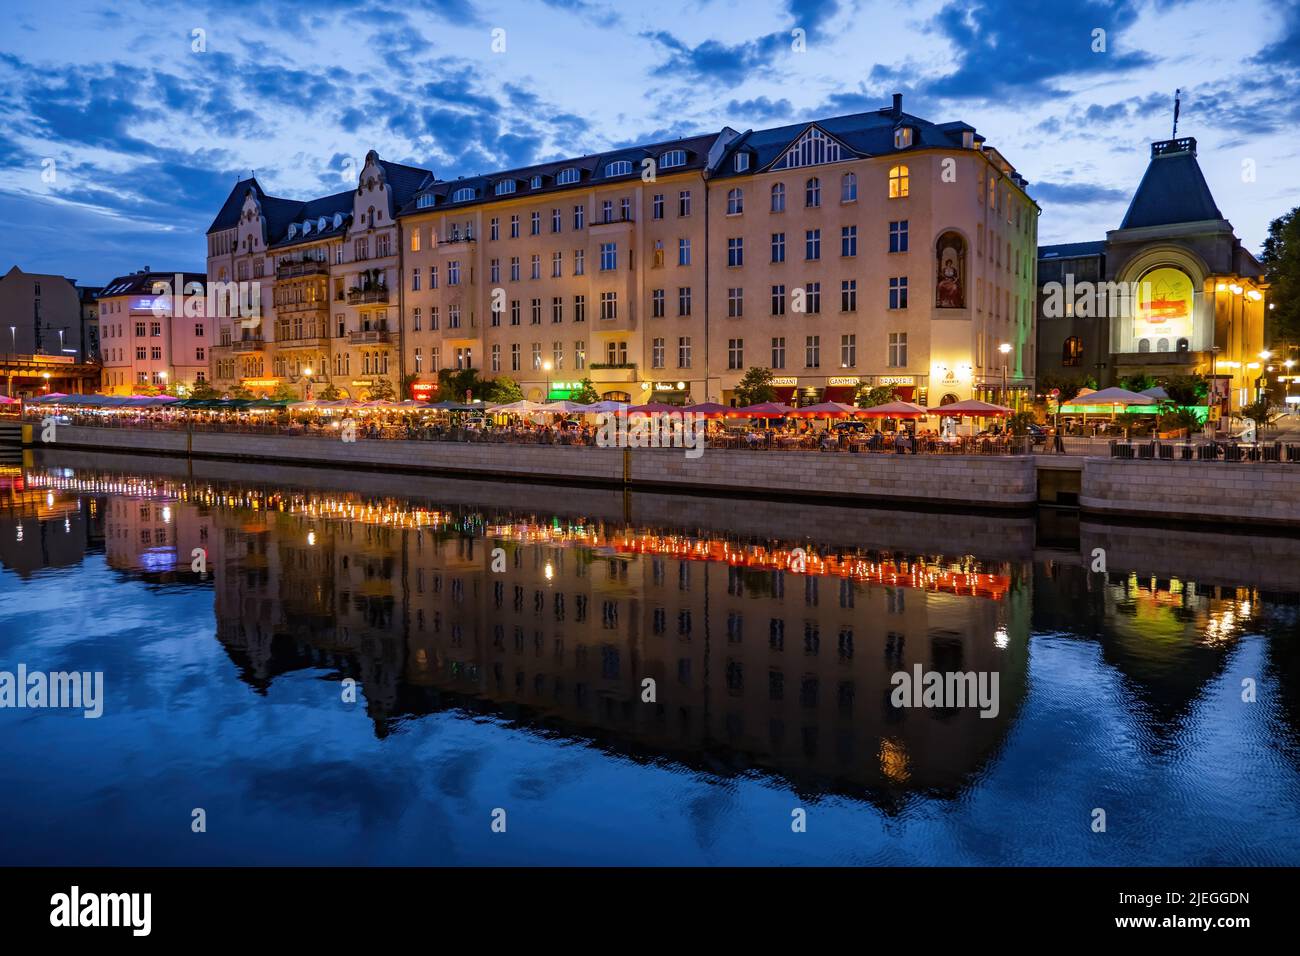 Berlin, Germany - August 8, 2021: City center with River Spree in the evening, riverside buildings on Schiffbauerdamm street with restaurants, cafes i Stock Photo